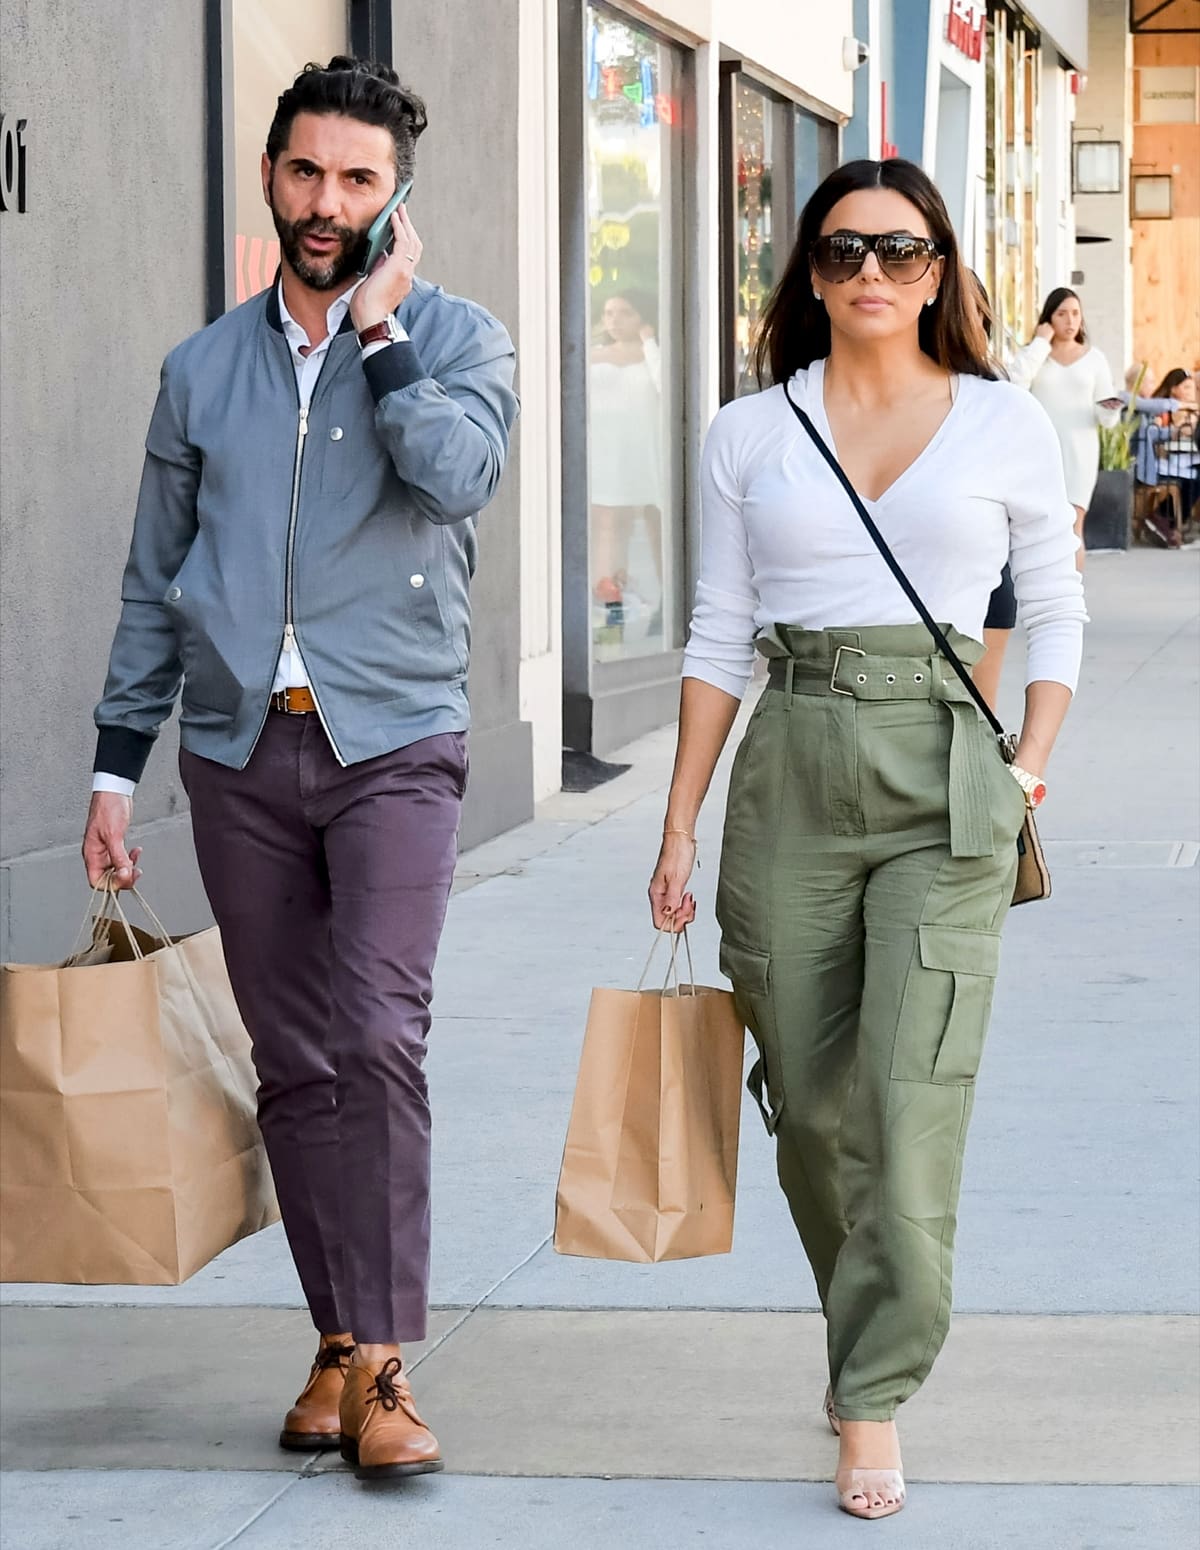 Eva Longoria, wearing Rag & Bone Tilda cargo pants paired with a white blouse, Gianvito Rossi Lyn mules, and a Sabukana Loteria bag, and her husband José Bastón enjoy an afternoon of shopping